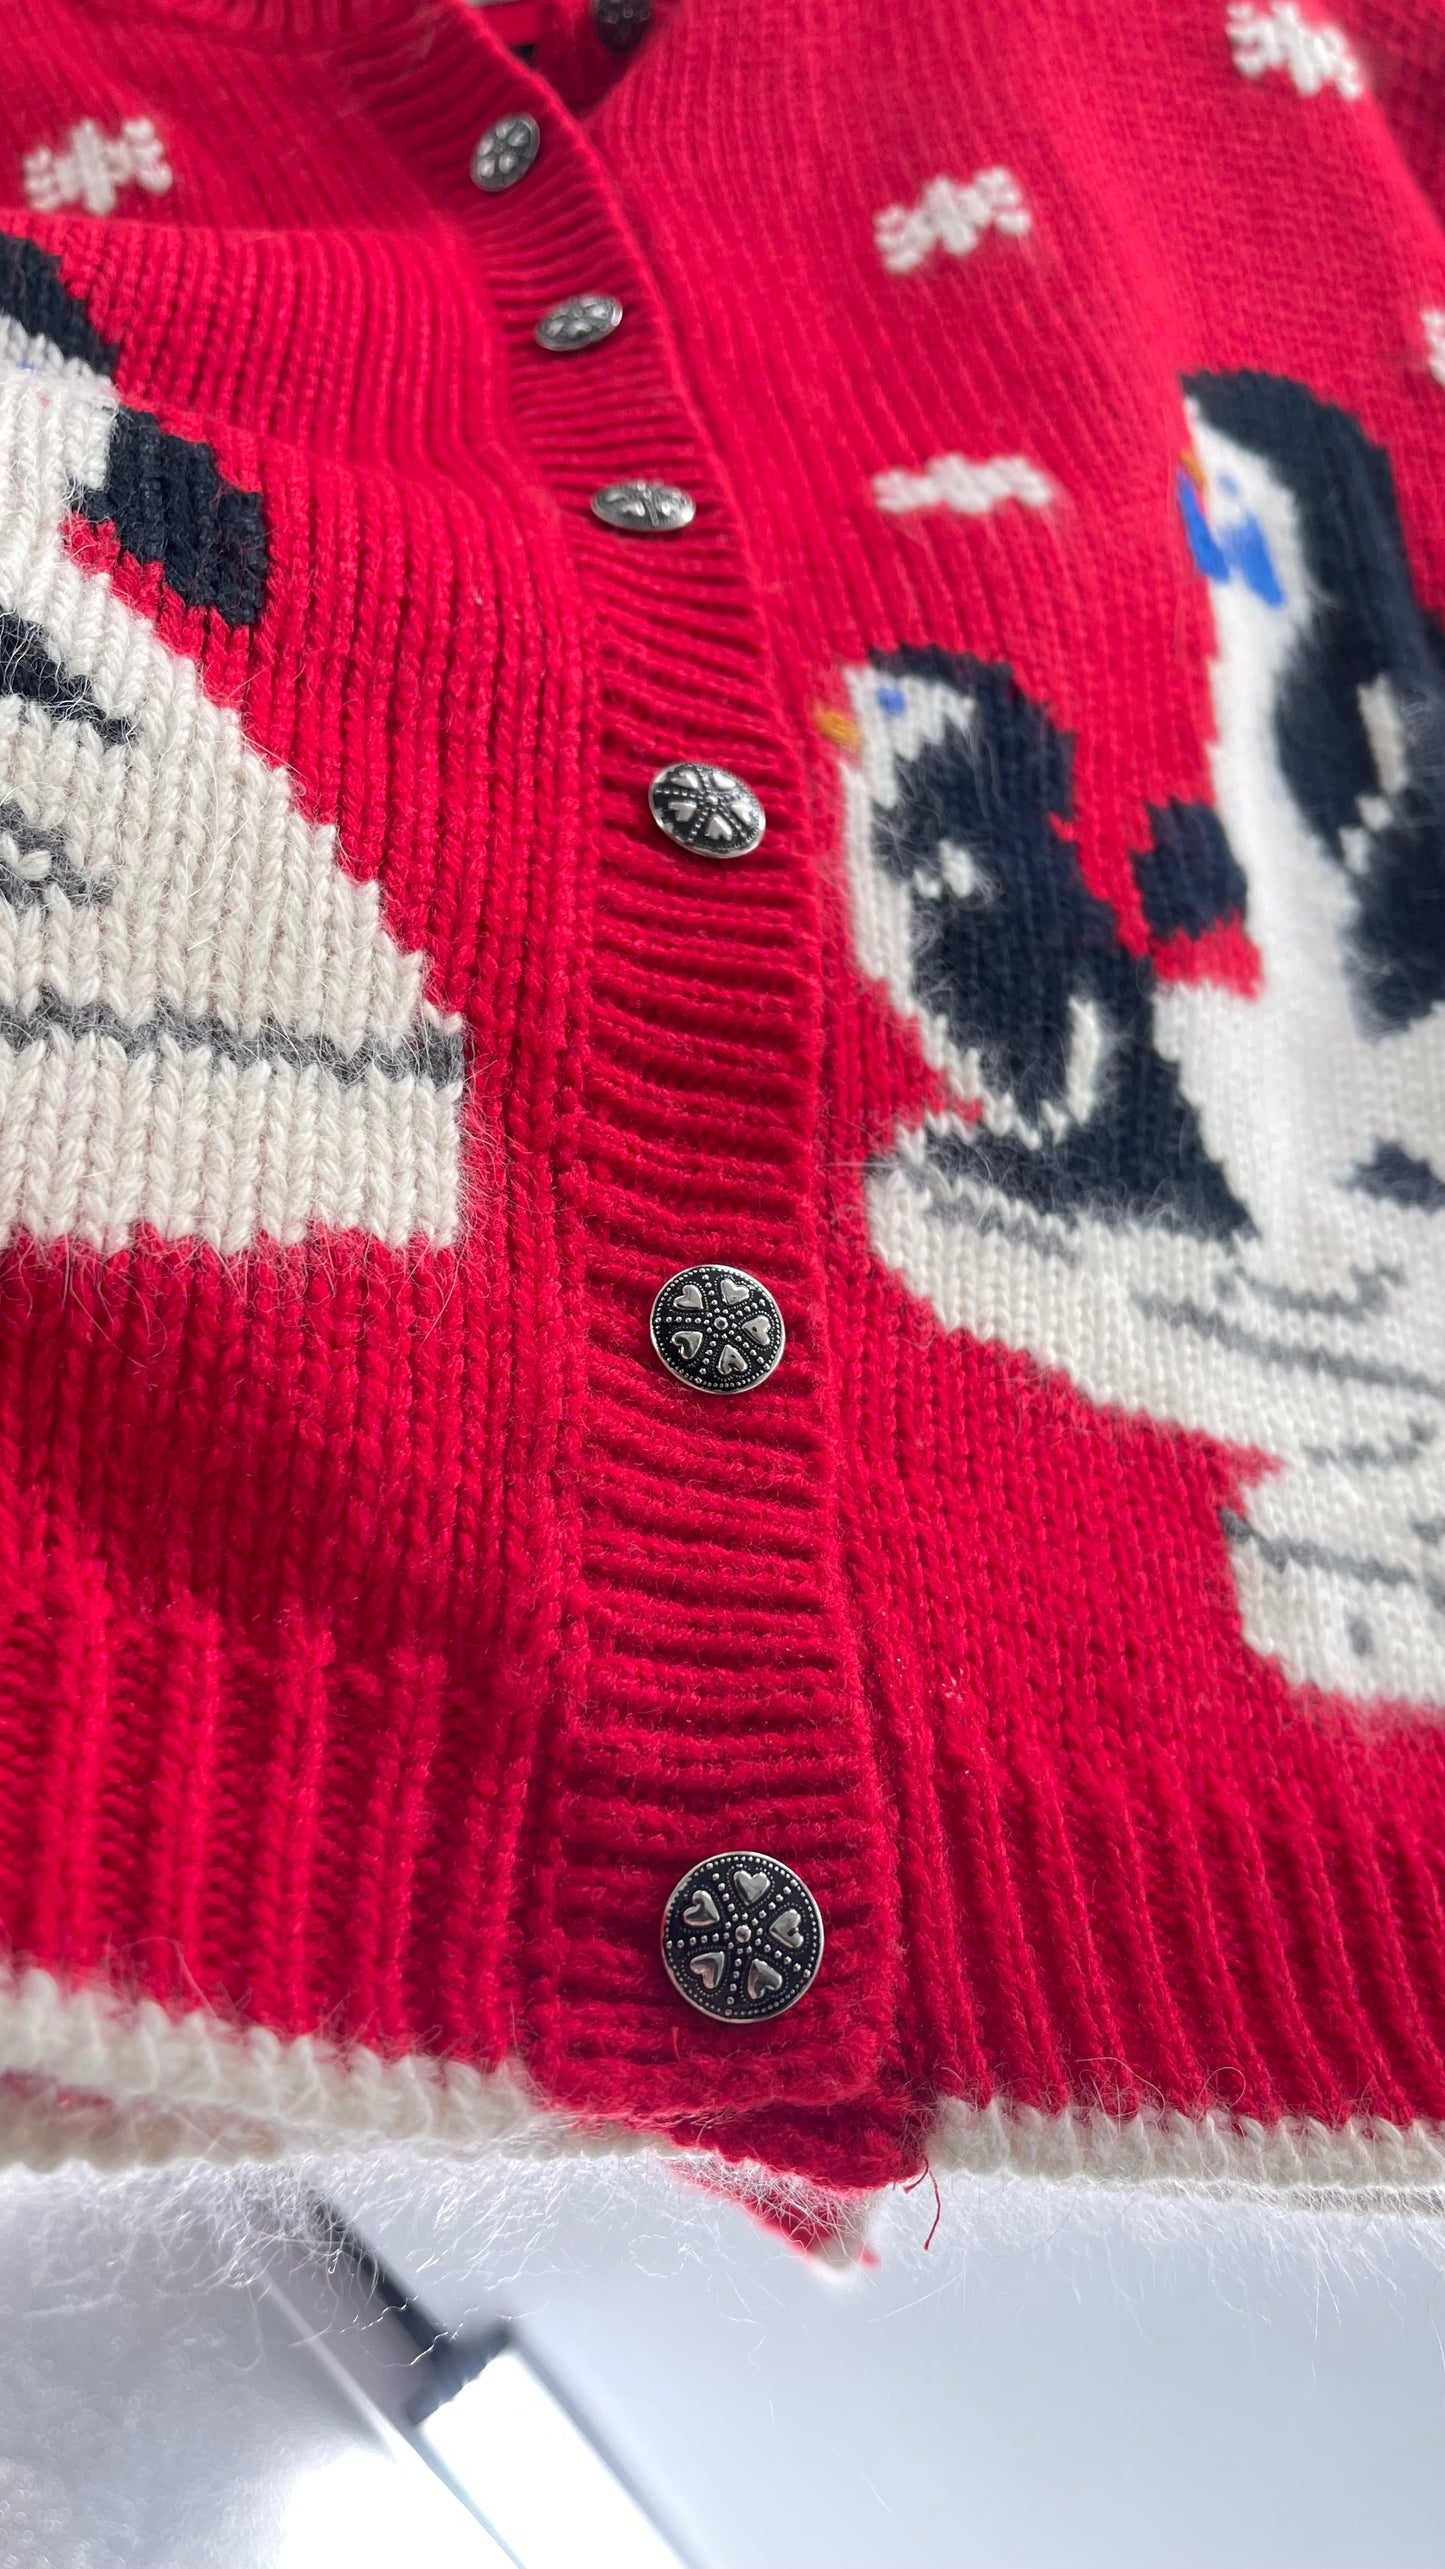 Vintage Karen Scott Silver Button Front, Red Cardigan with Shoulder Padding and the Sweetest Festive Penguins in Bow Ties (Large)